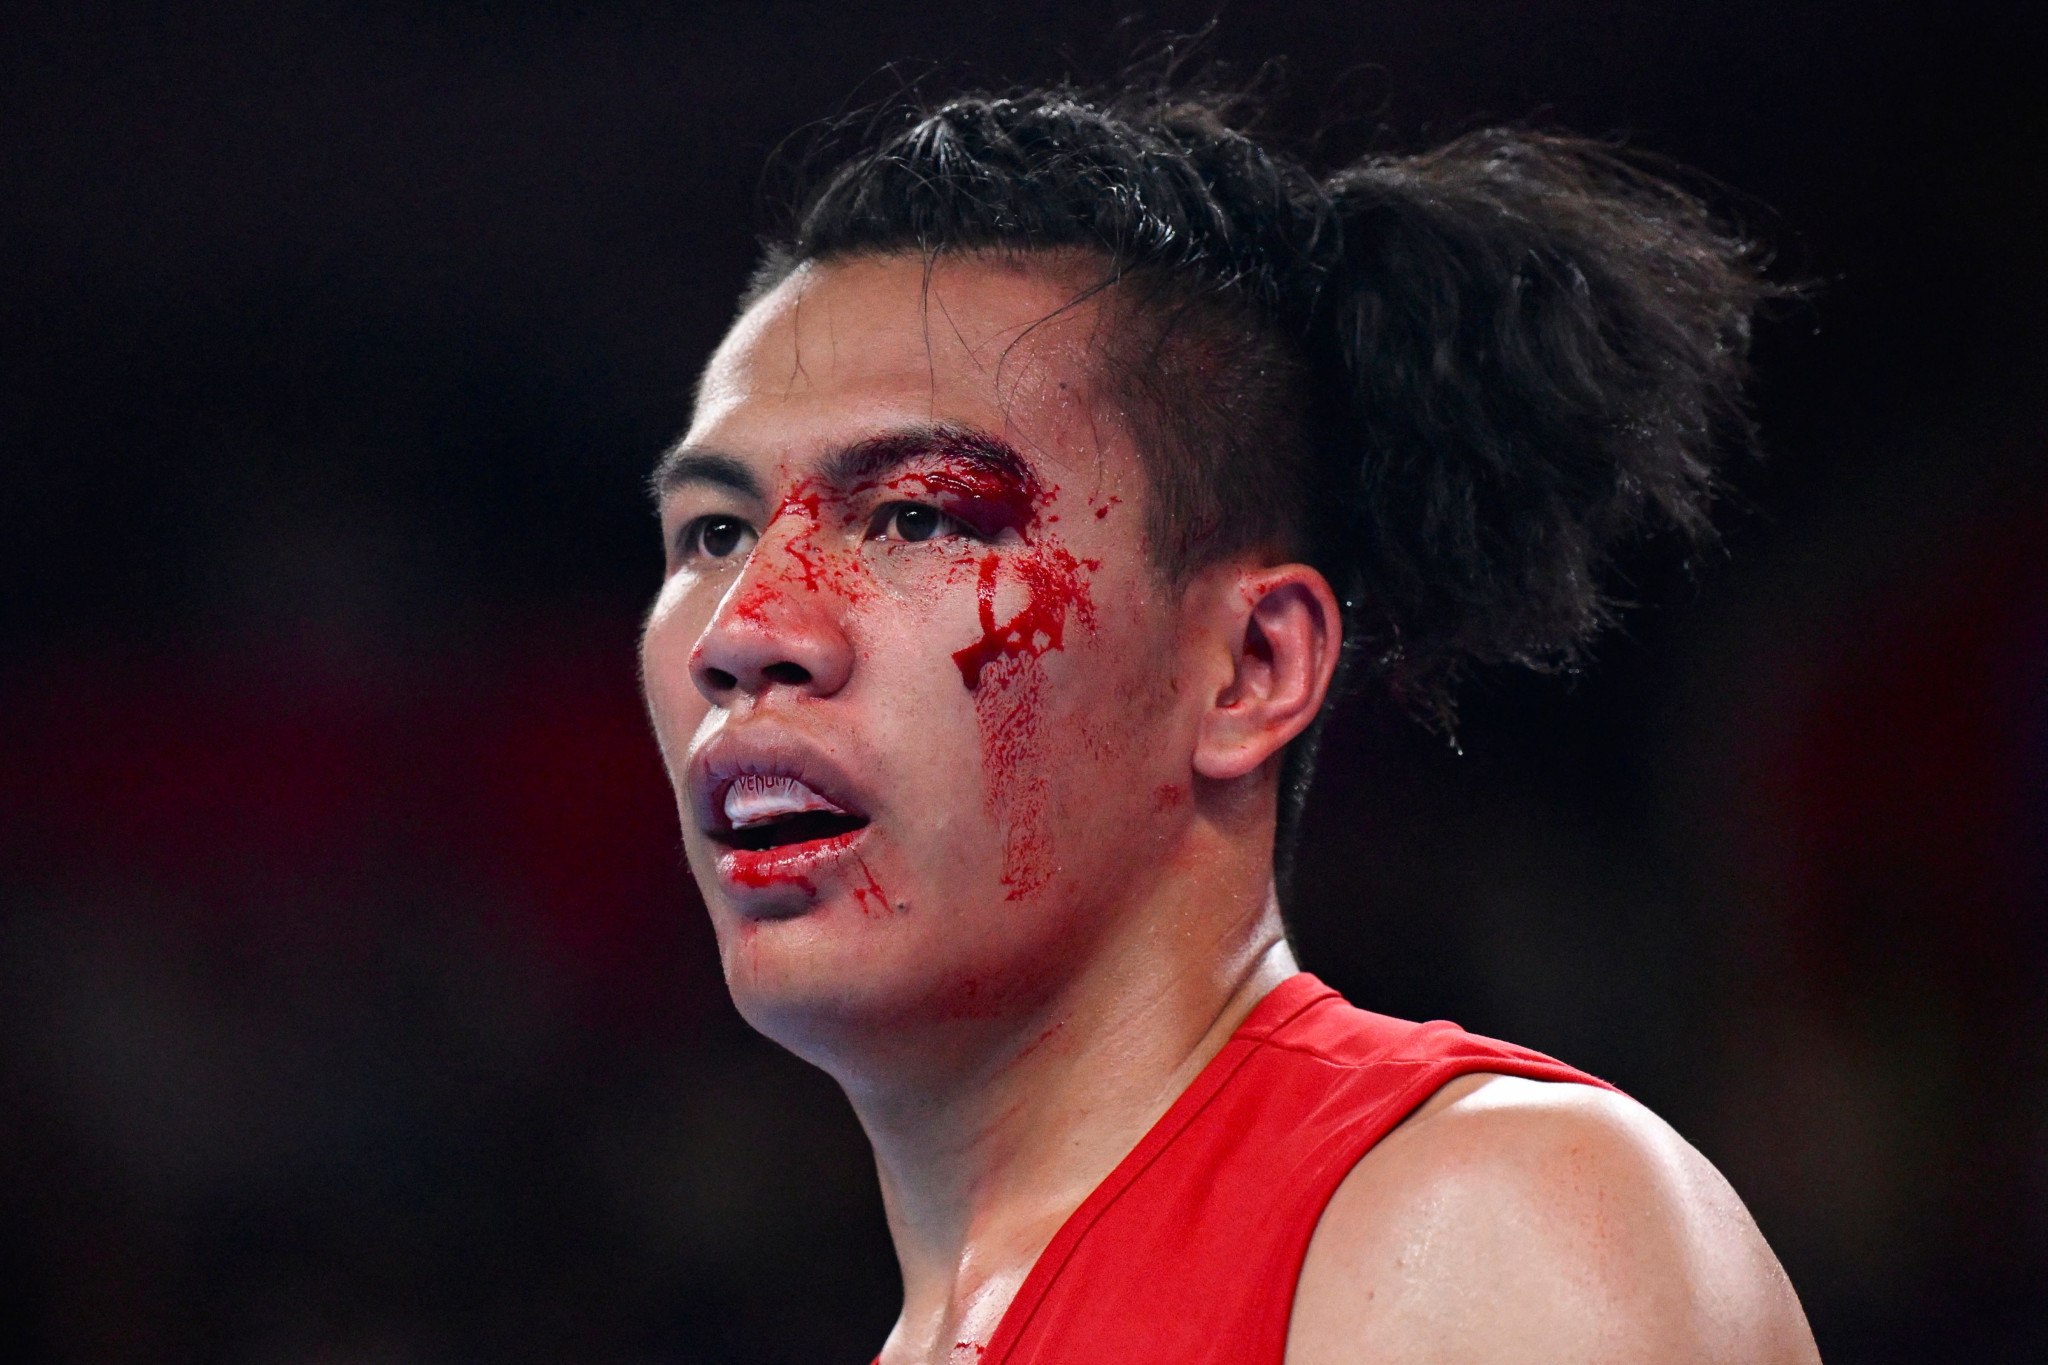 Chinese Taipei's Kan Chia Wei was forced to forfeit the men's 63.5-71kg boxing final after officials ruled him out due to an eyebrow injury from the semi-finals ©Getty Images